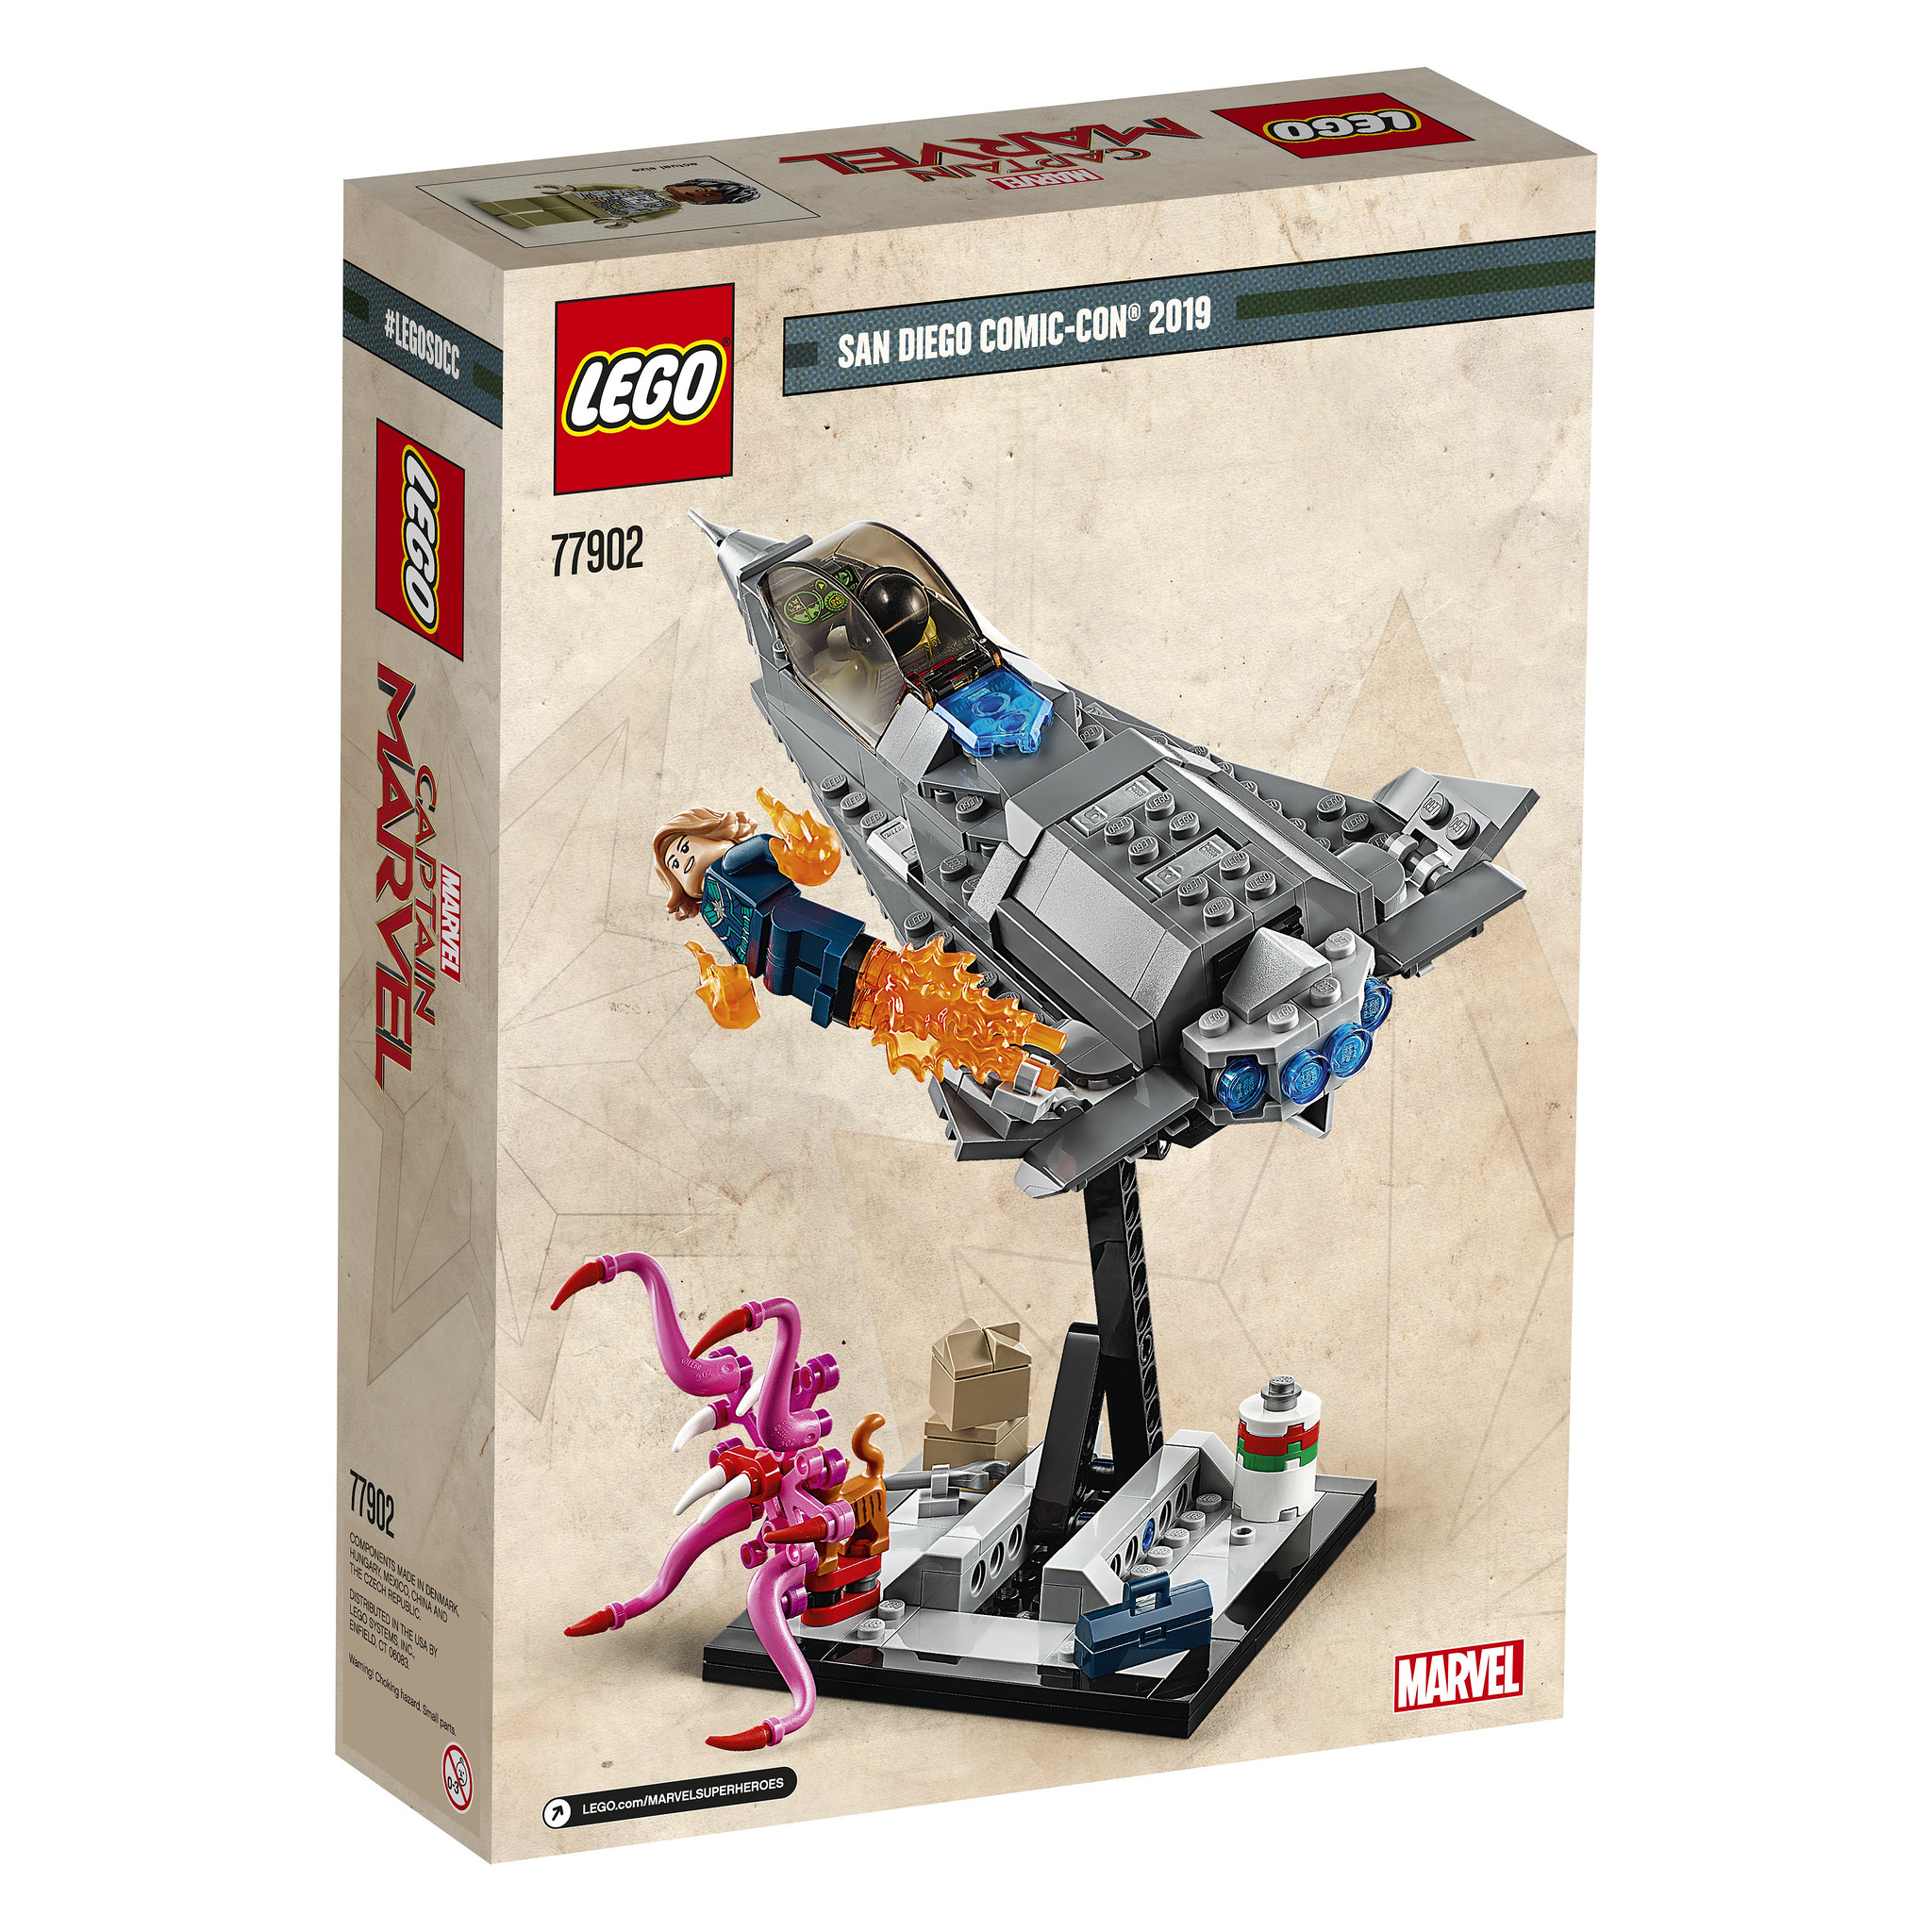 lego-captain-marvel-and-the-asis-77902-box-back-2019-sdcc-san-diego-comic-con zusammengebaut.com